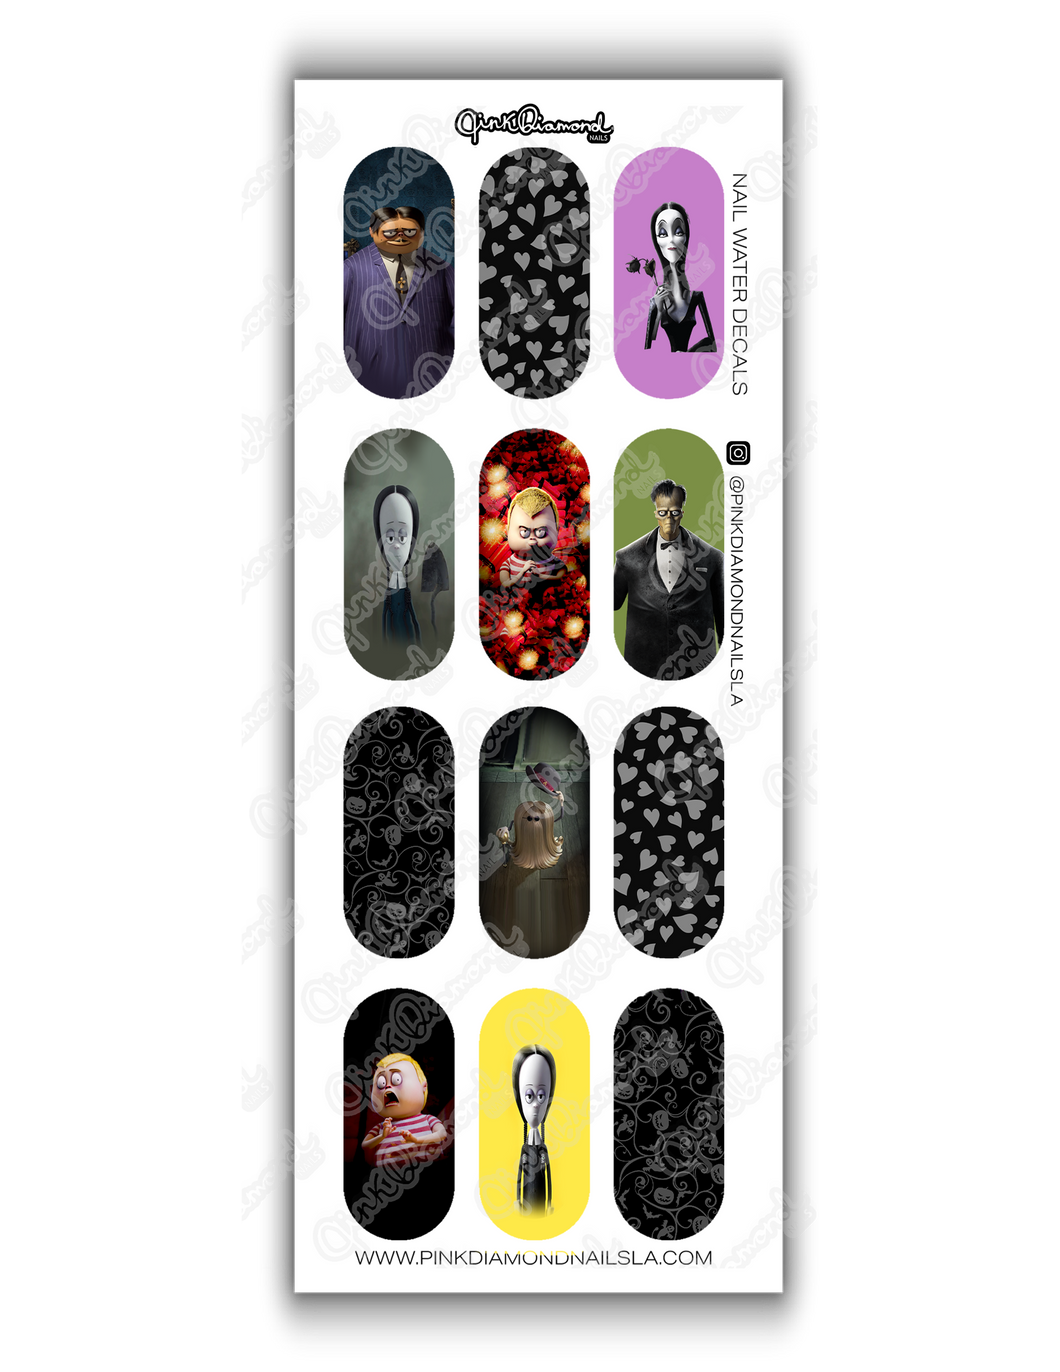 Nail water decals - The Adams family collection